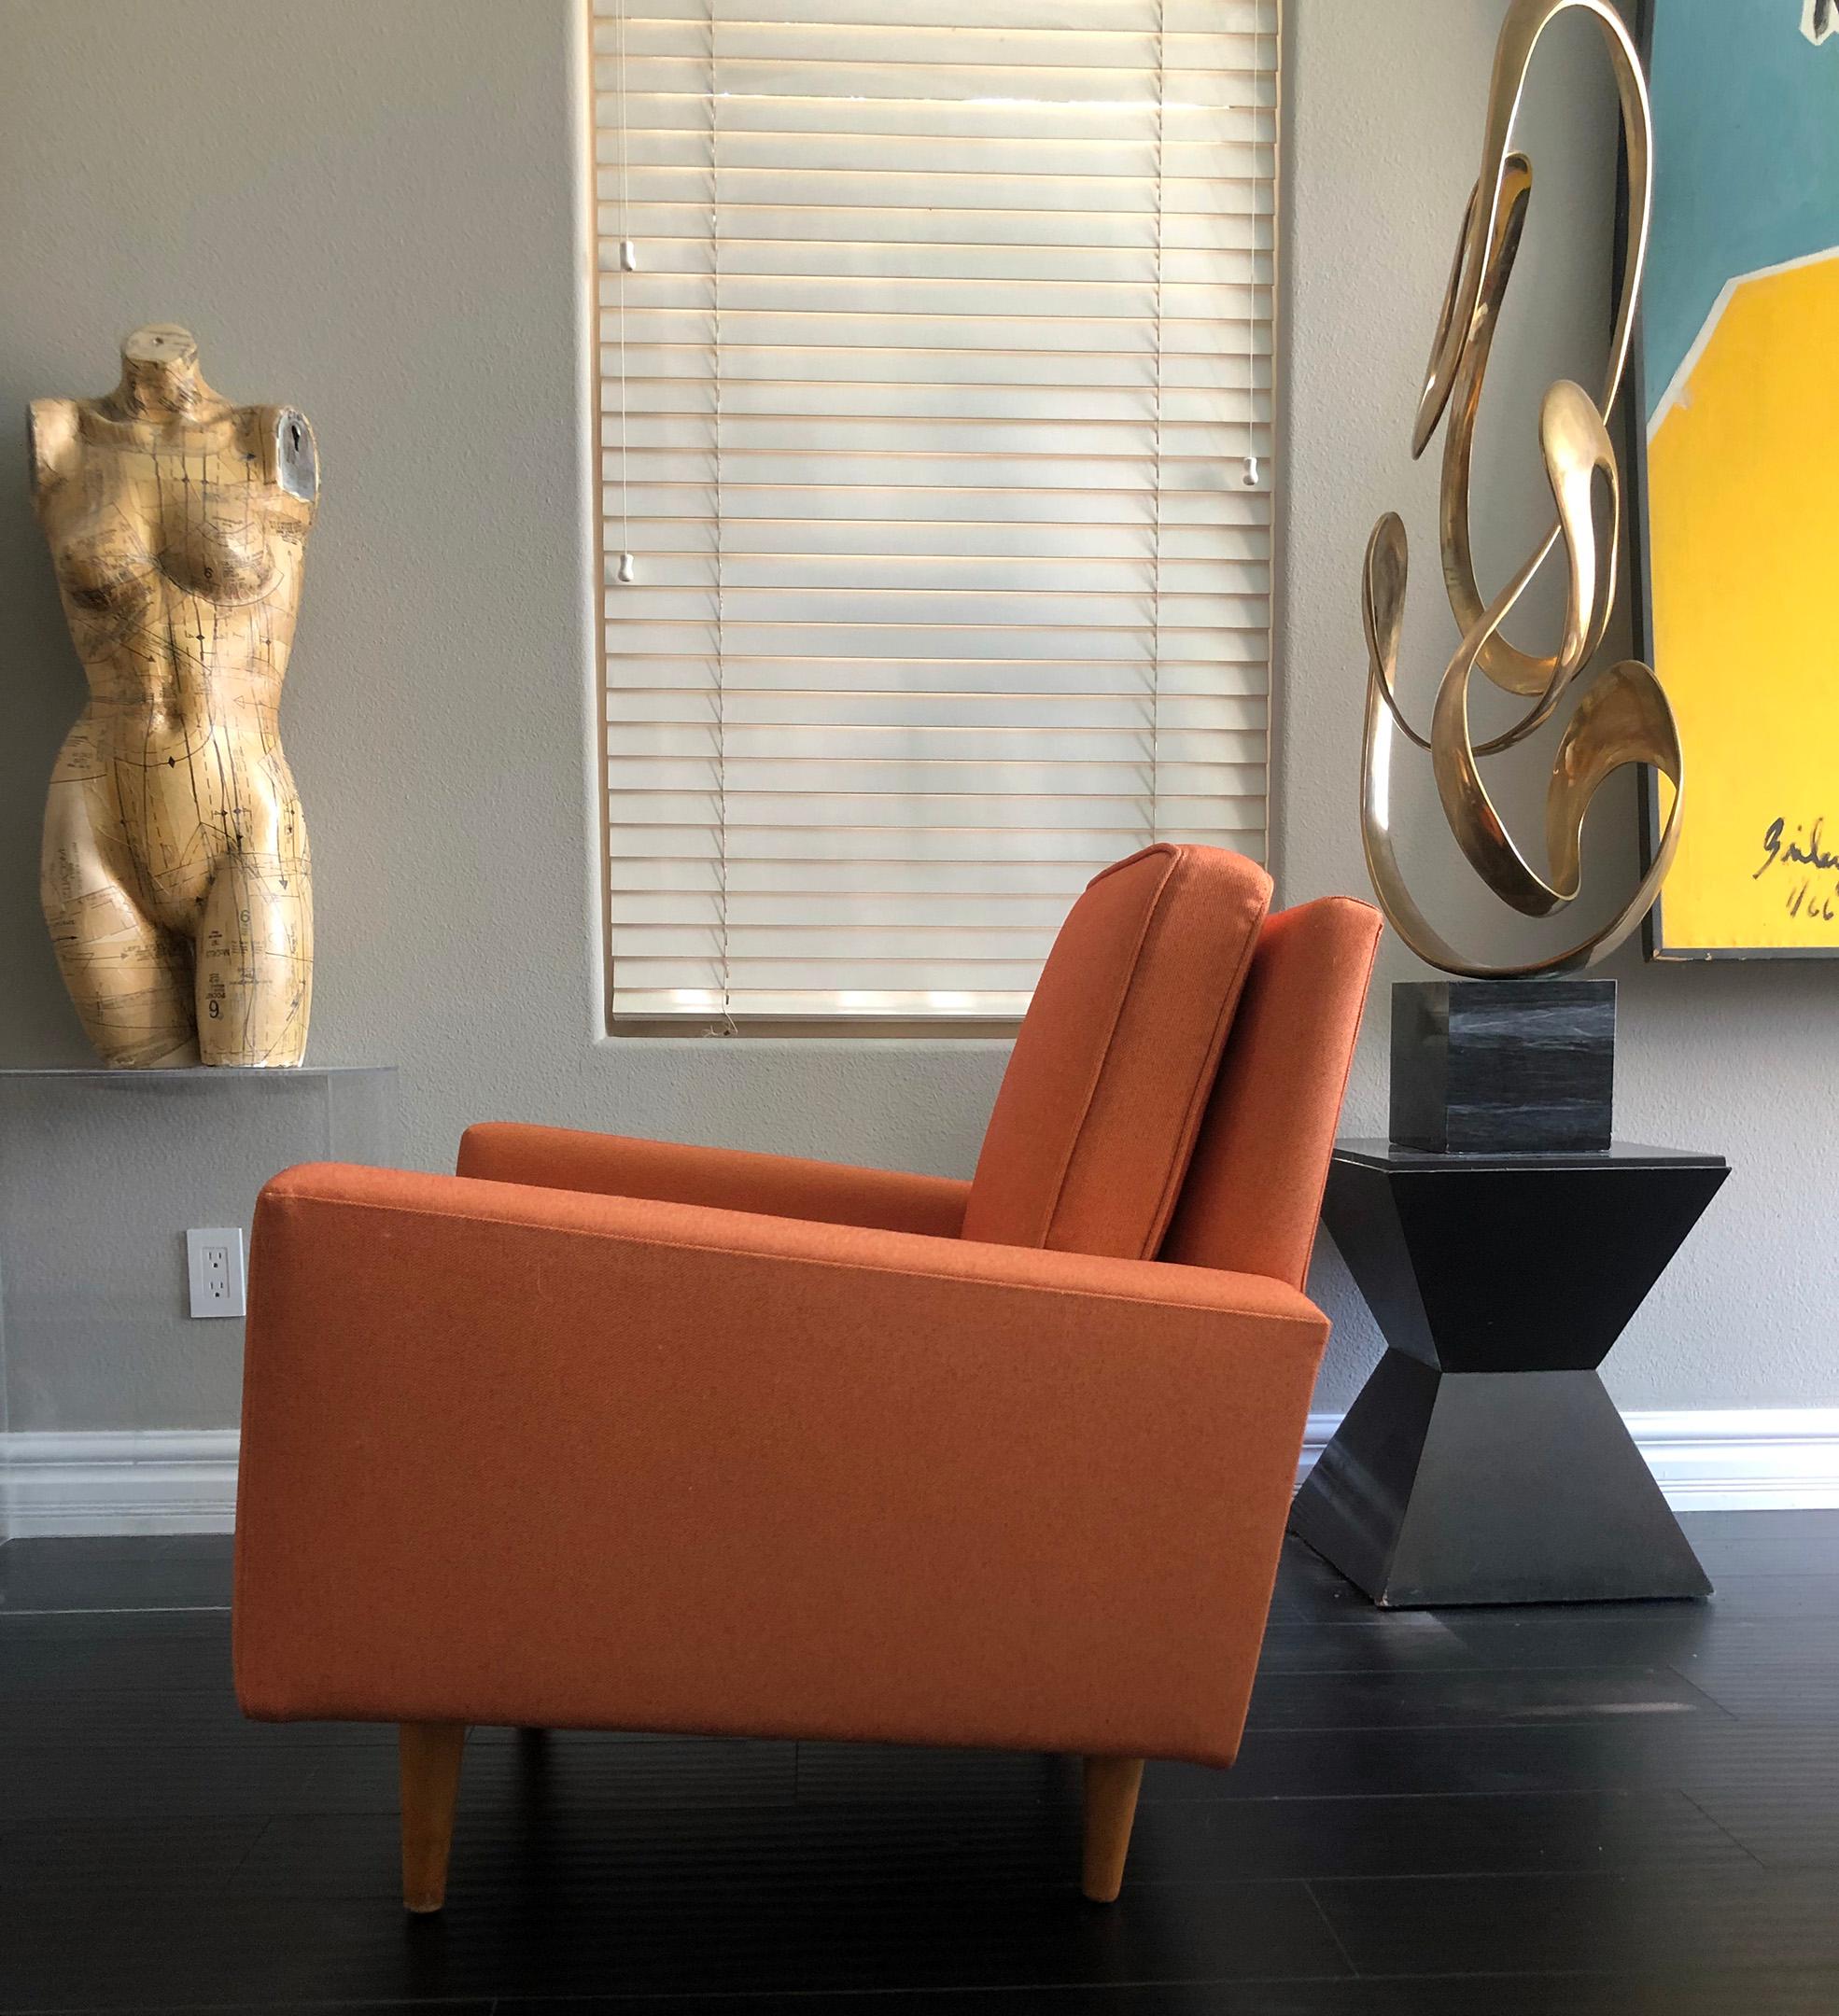 This lounge chair is truly stunning. This early Florence Knoll lounge chair features cone shaped birch legs, and fresh tangerine colored tone-on-tone period appropriate fabric. 

With its clean lines, angular body, and modern shape, this lounge